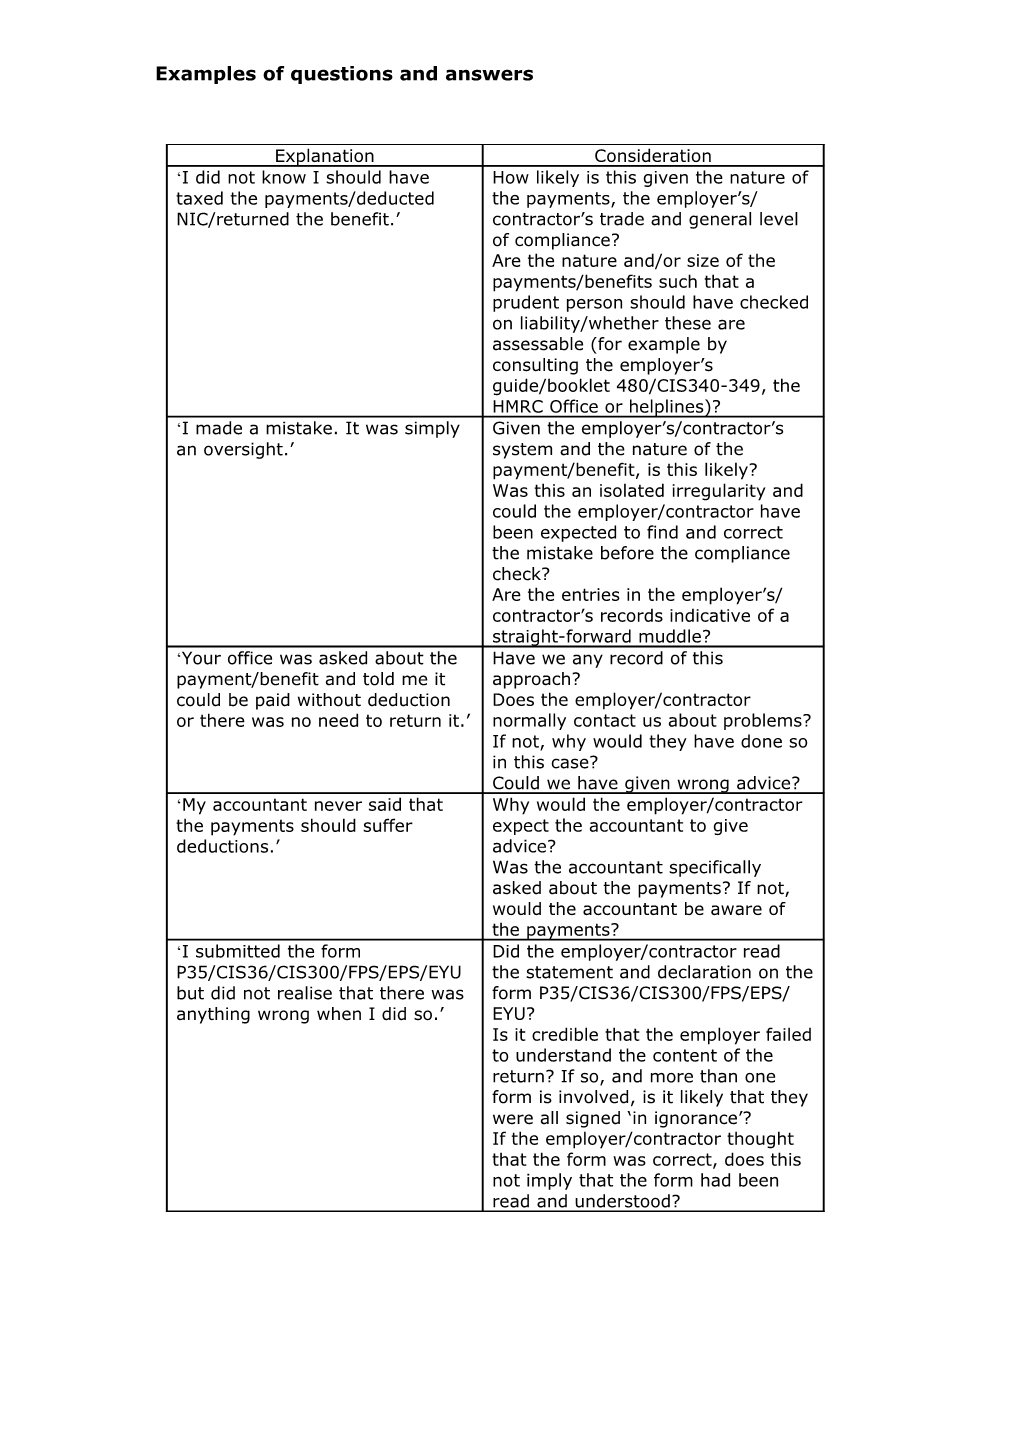 Some Examples of Answers Which May Be Given in Response to Questioning and the Consideration